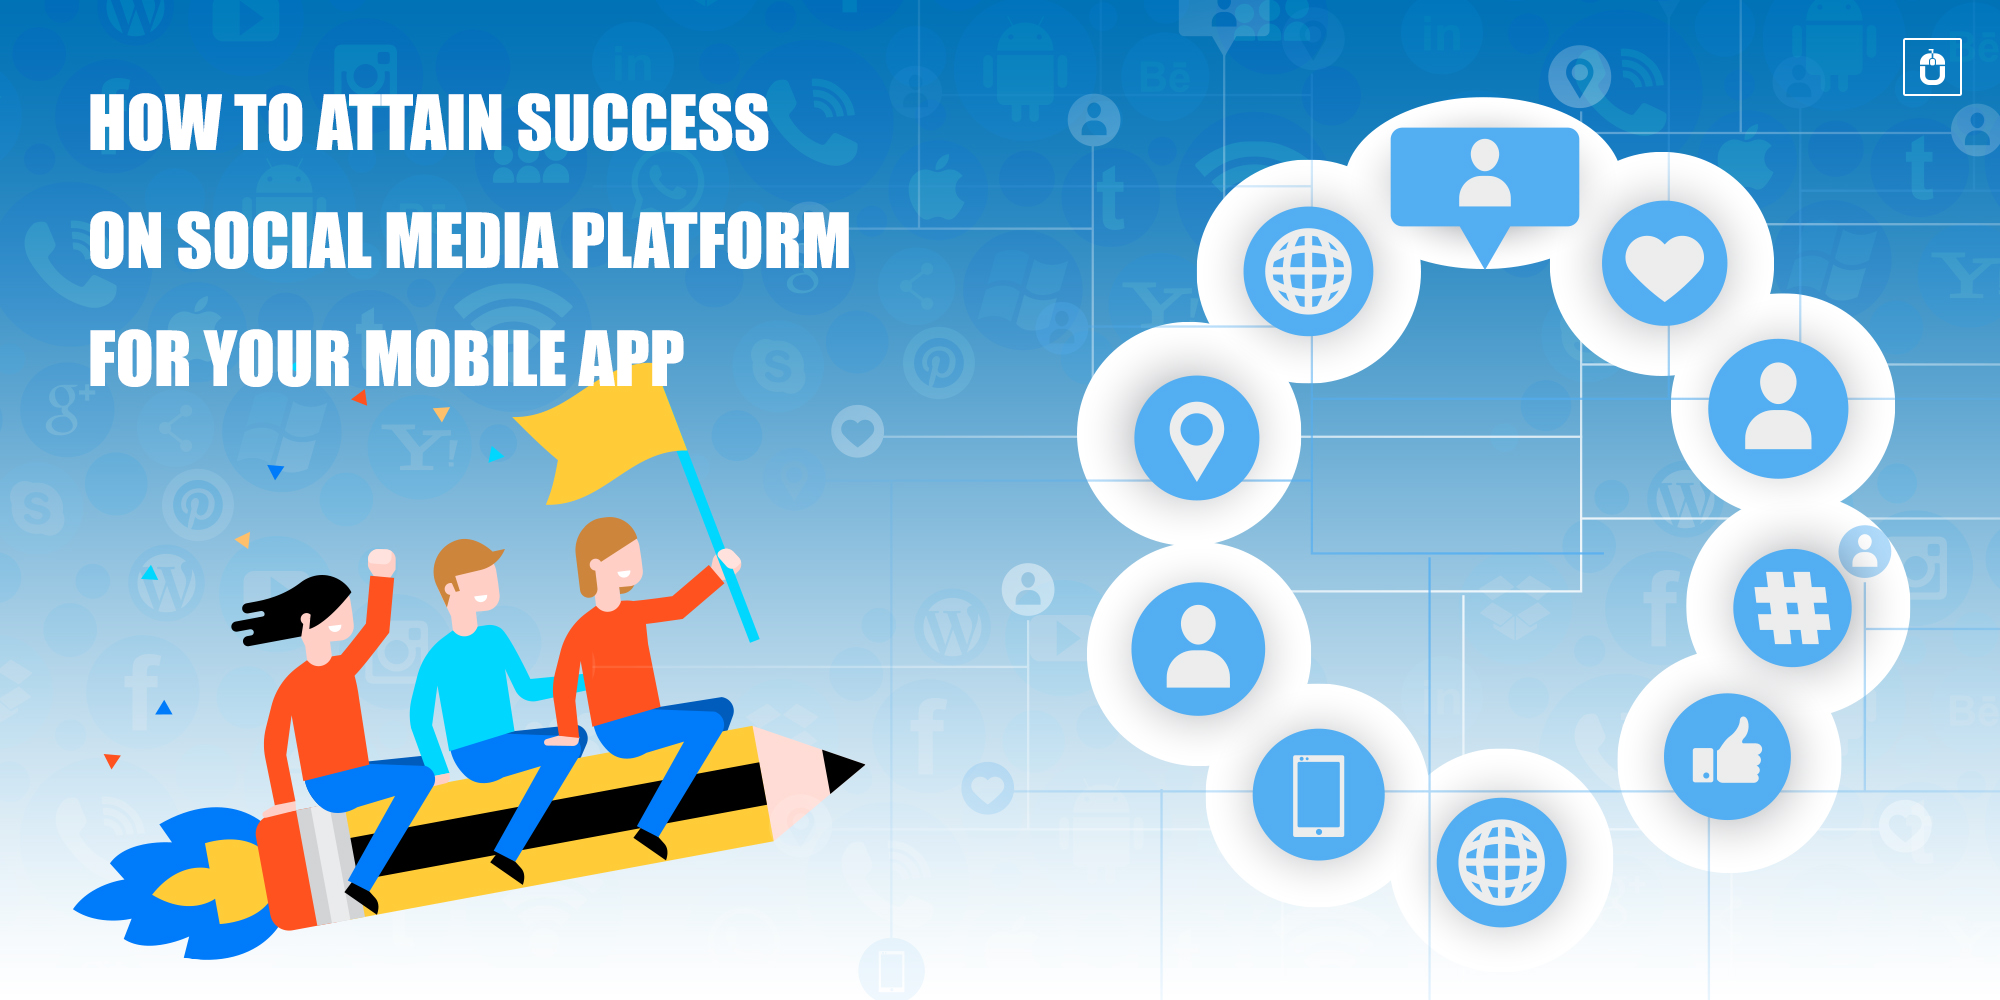 How To Attain Success On Social Media Platform For Your Mobile App